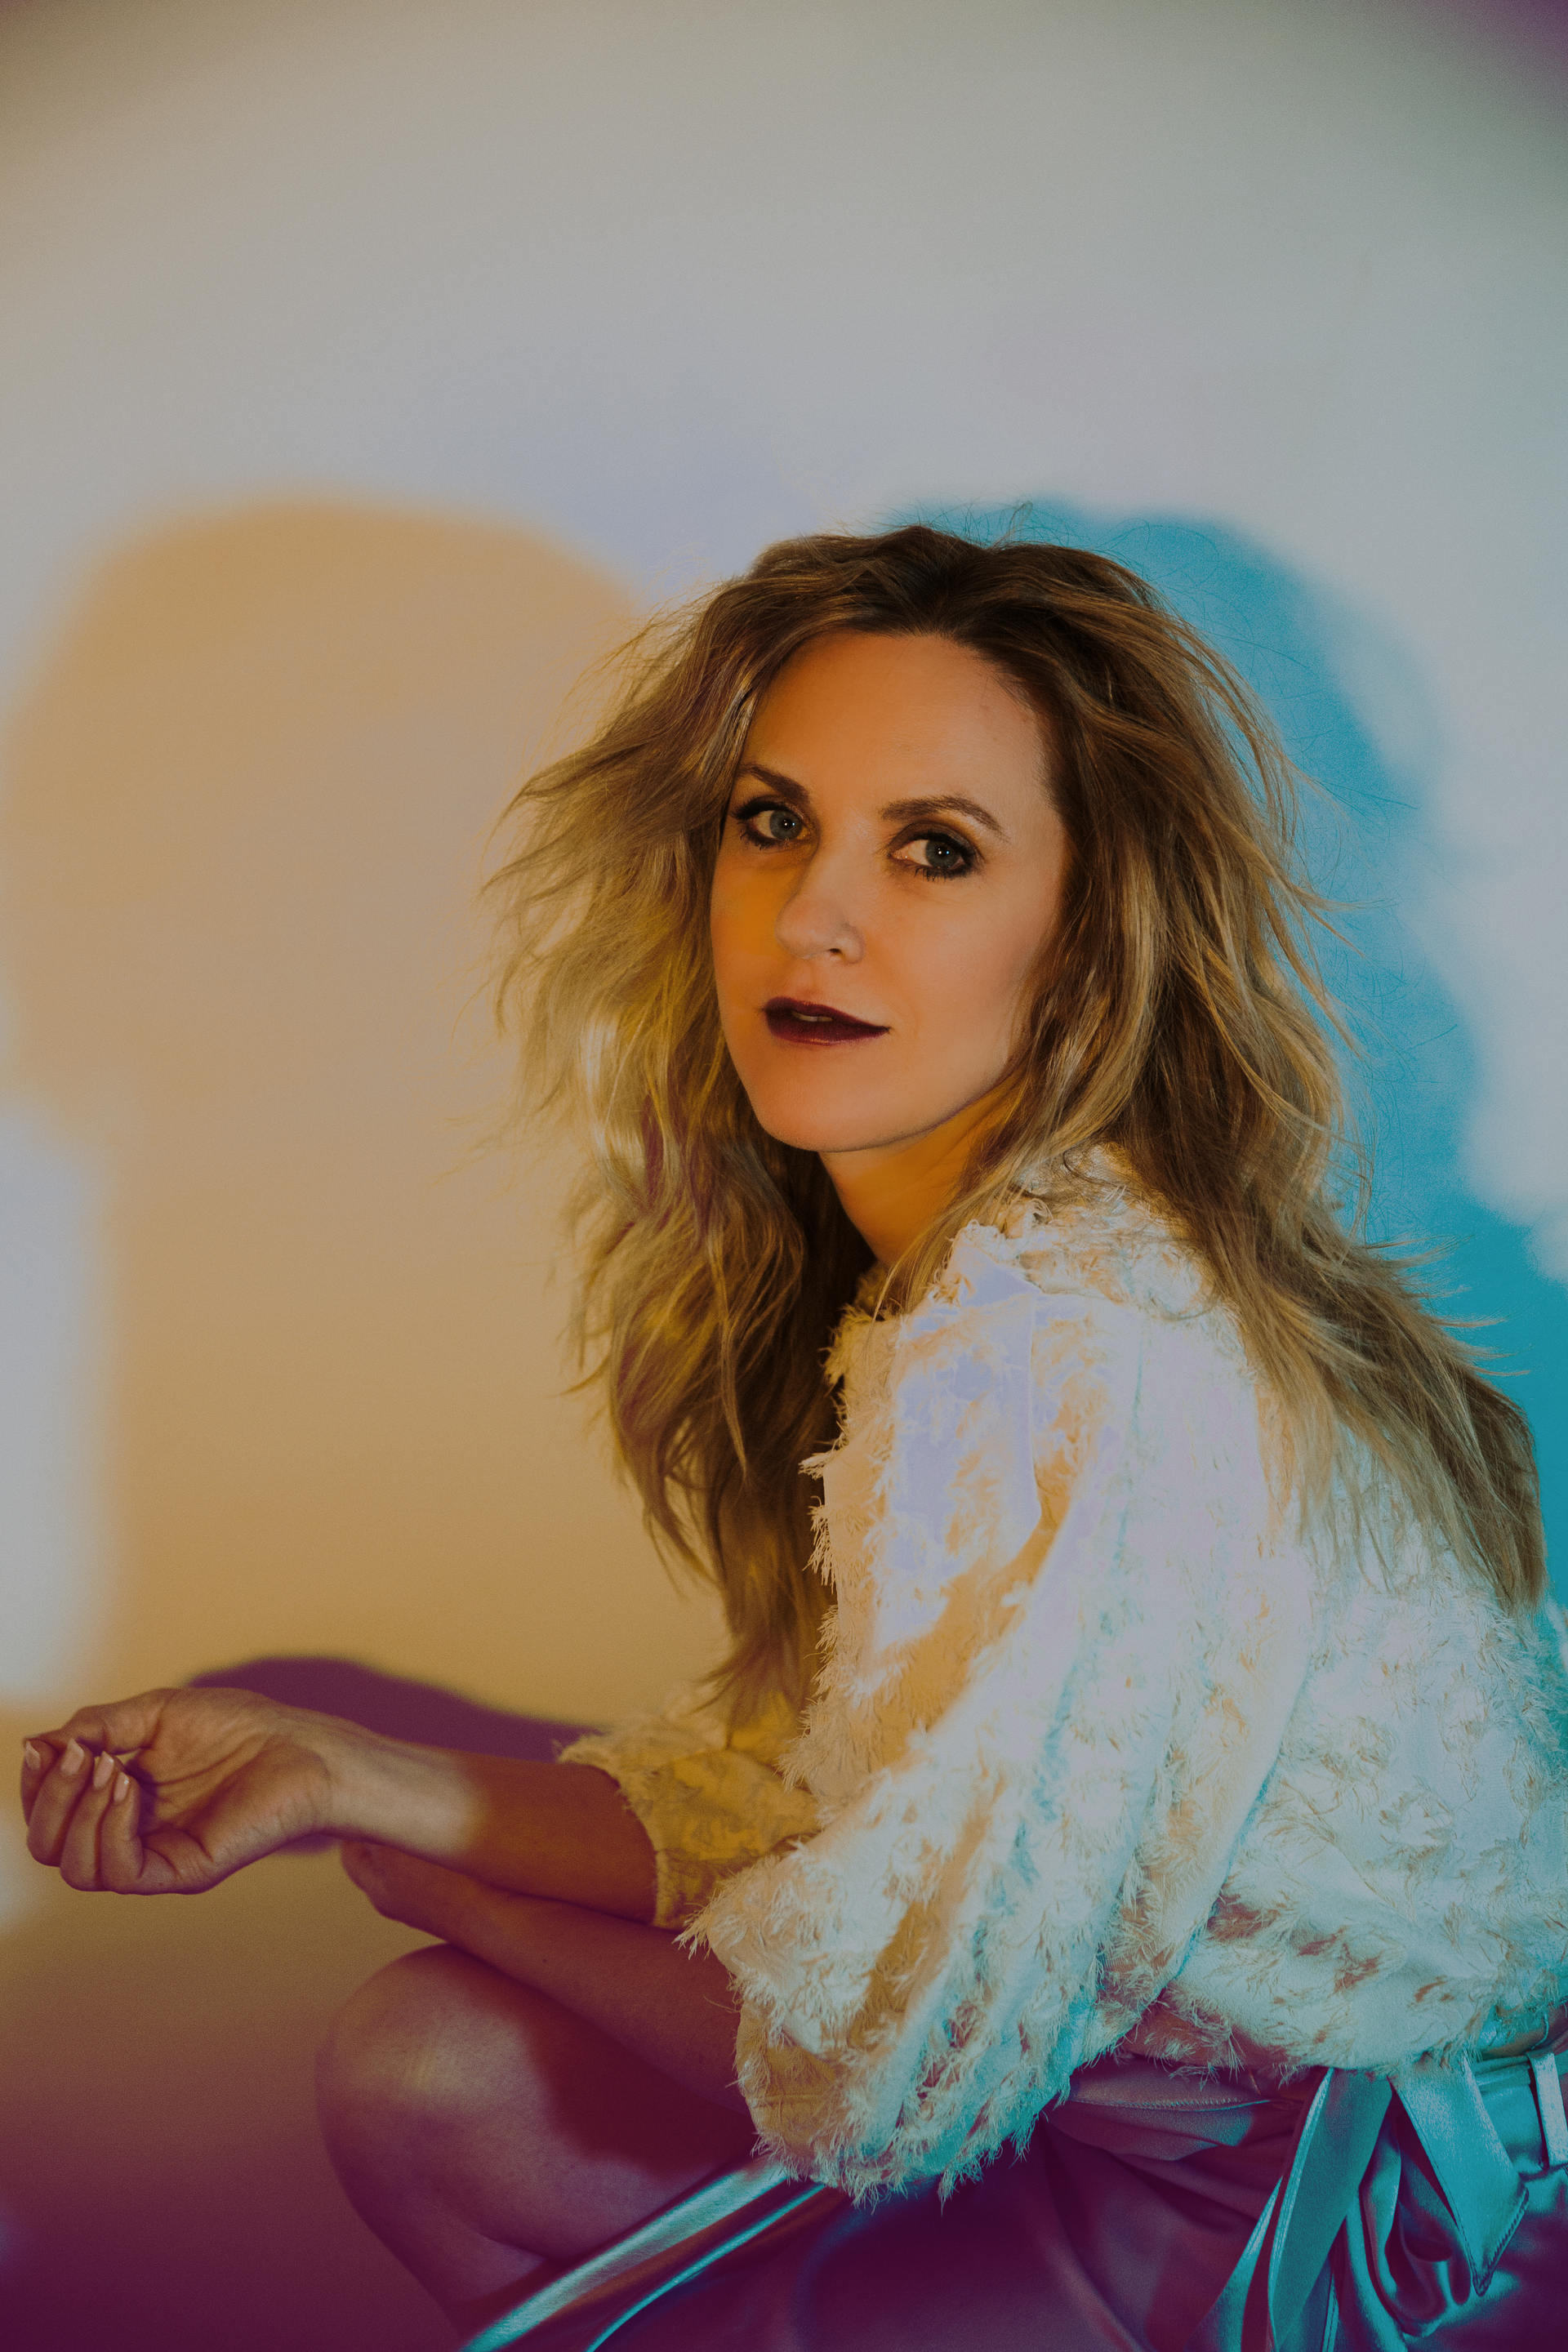 Recommended Cincinnati Concerts Liz Phair and Speedy Ortiz at 20th Century Theater (Oct